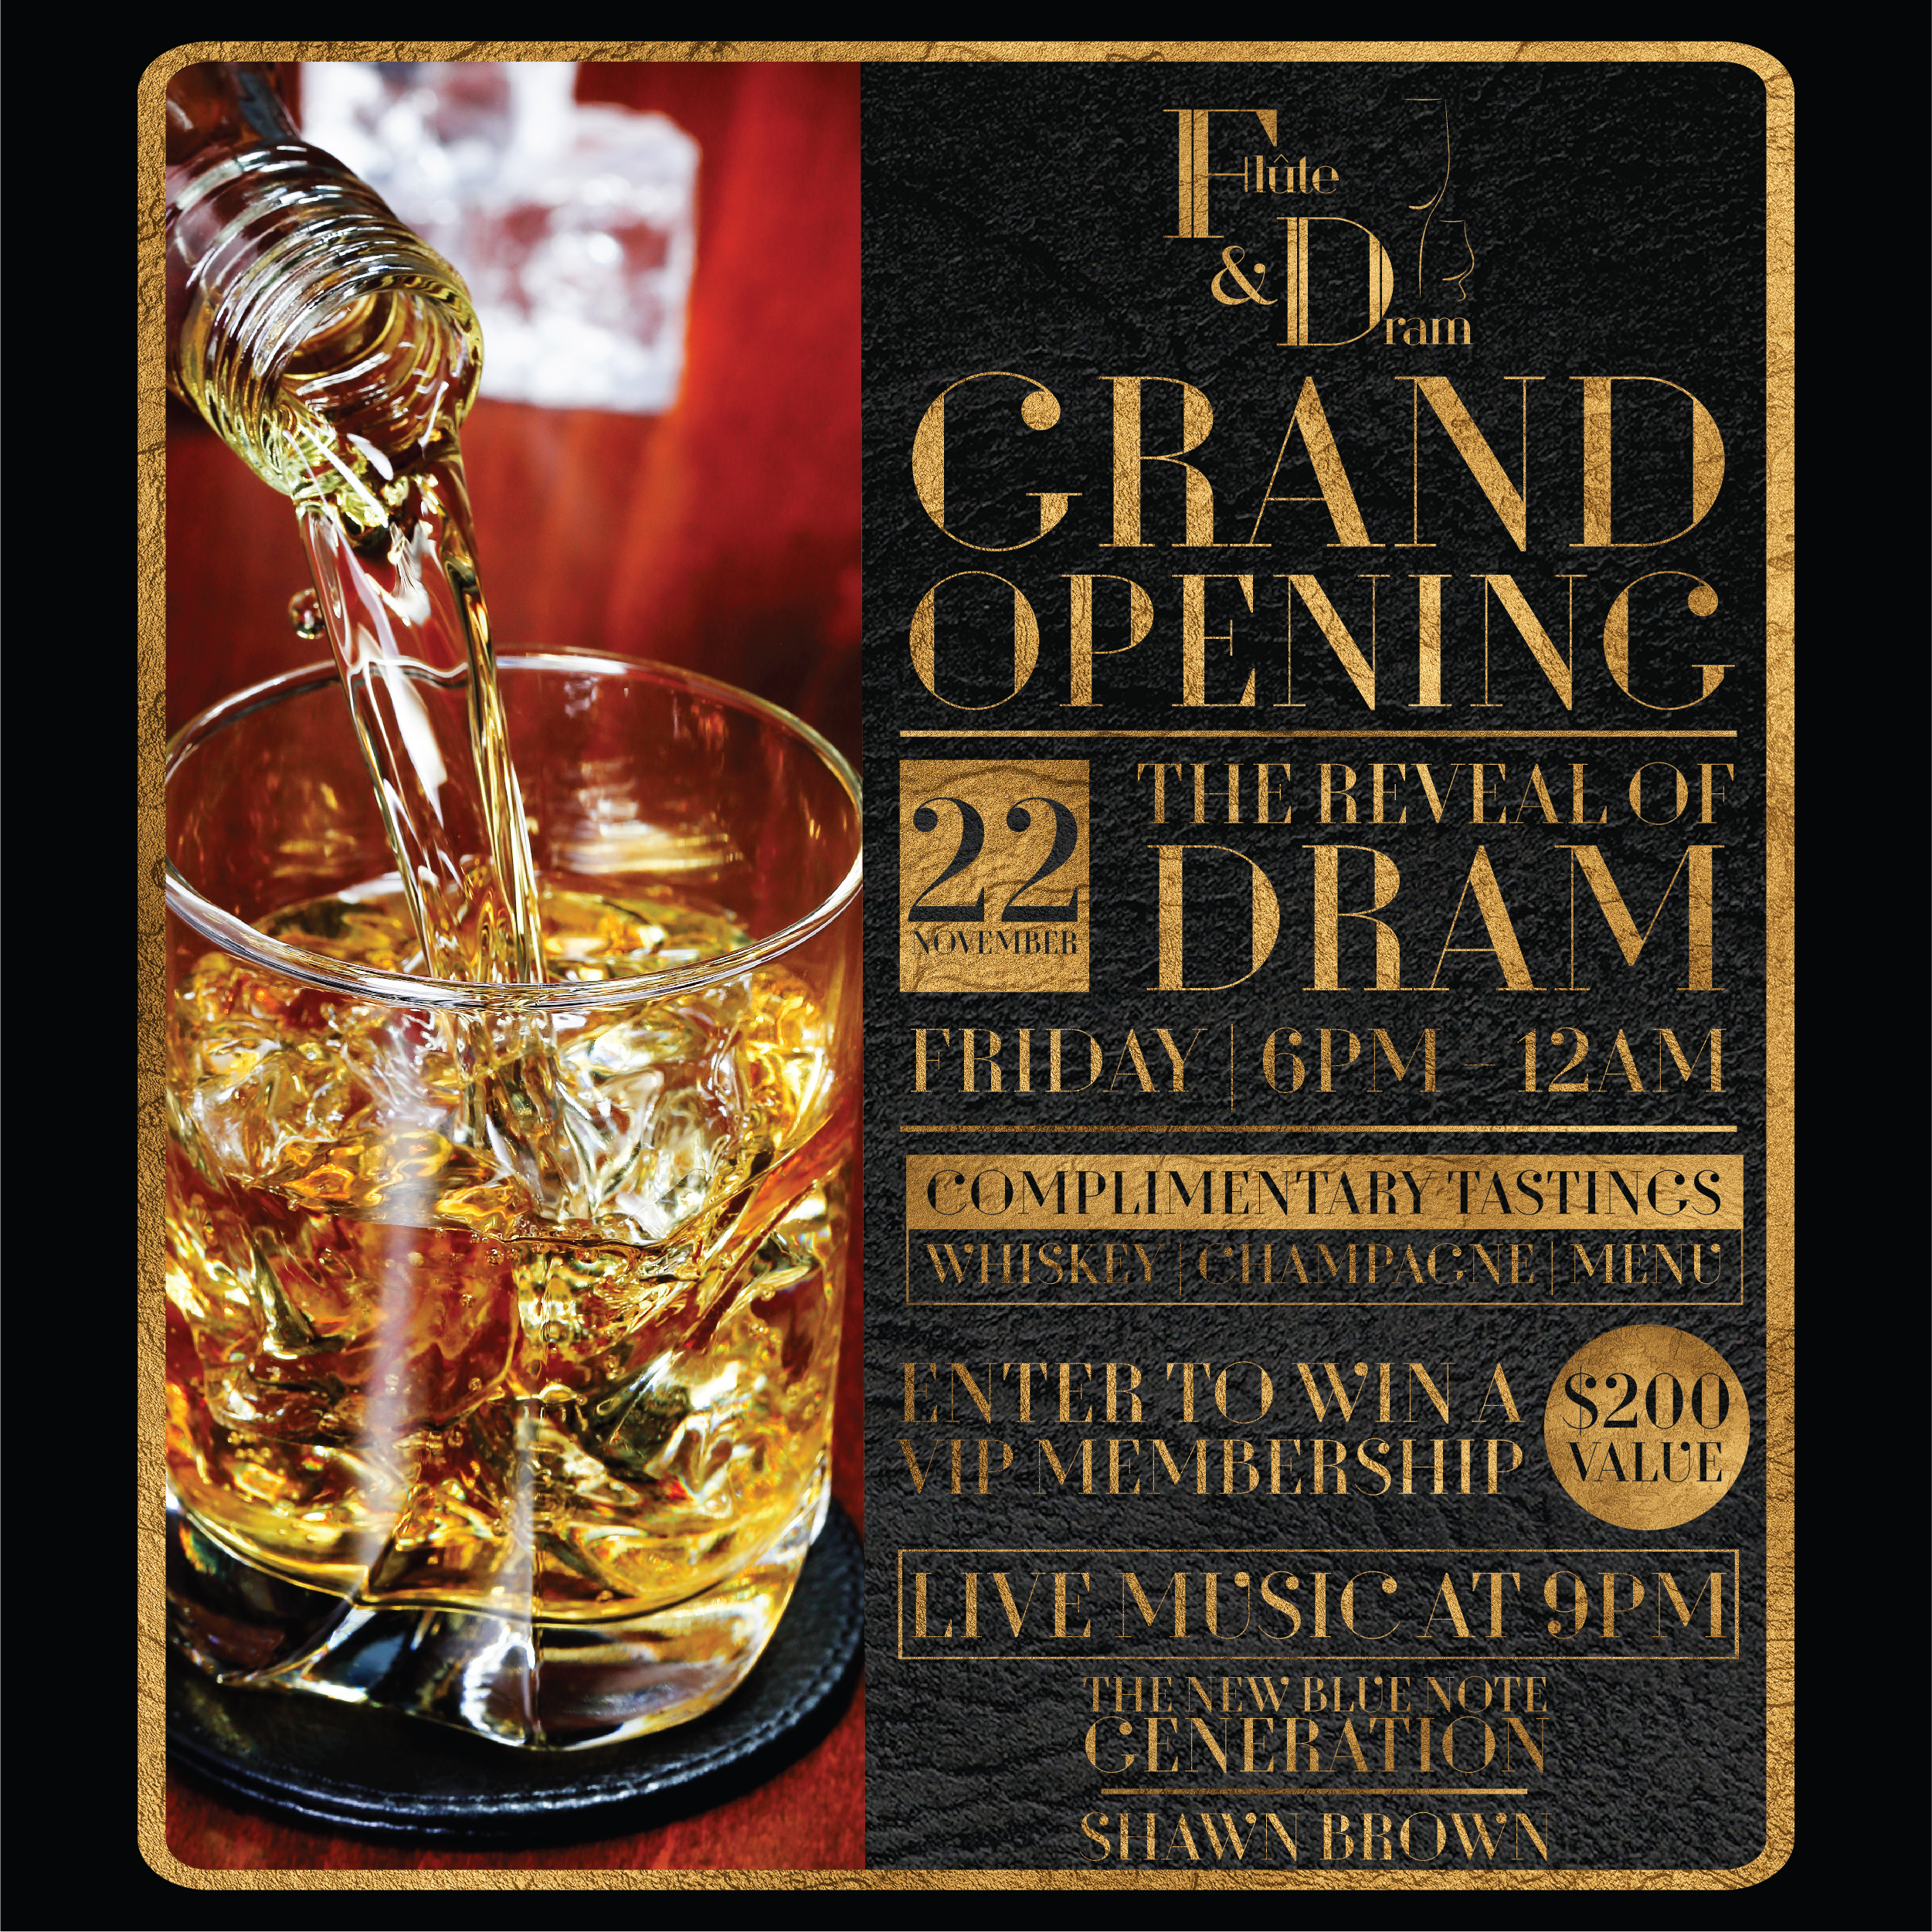 Beach Drive’s ‘Flute and Dram’ Hosts Grand Opening Reception